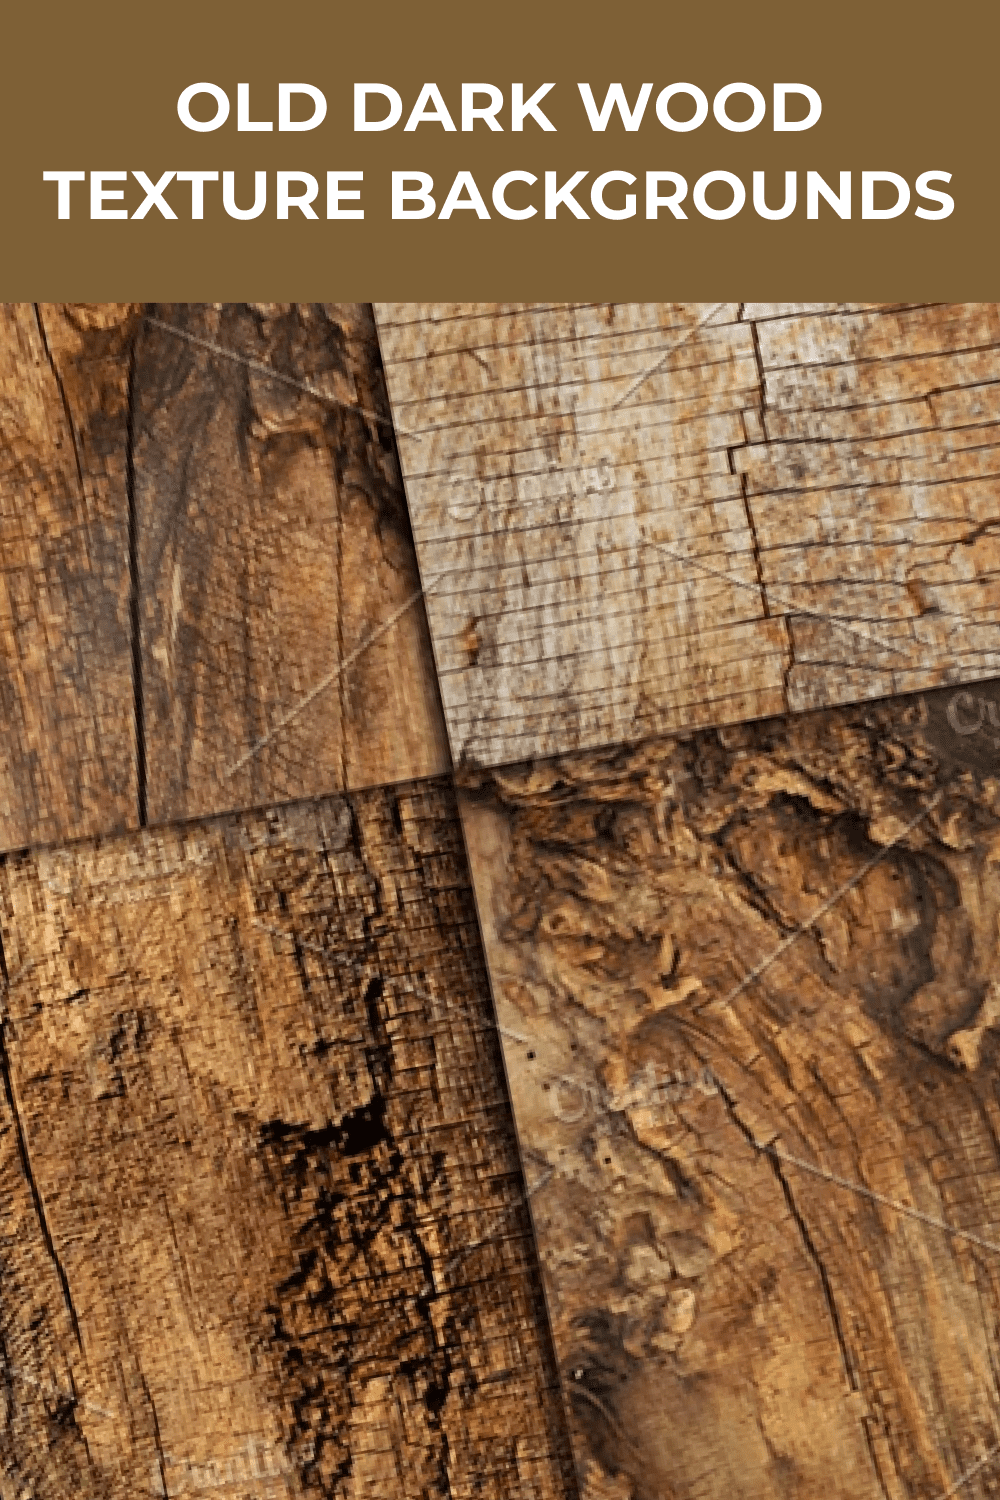 06 old dark wood texture backgrounds 1000x1500 1